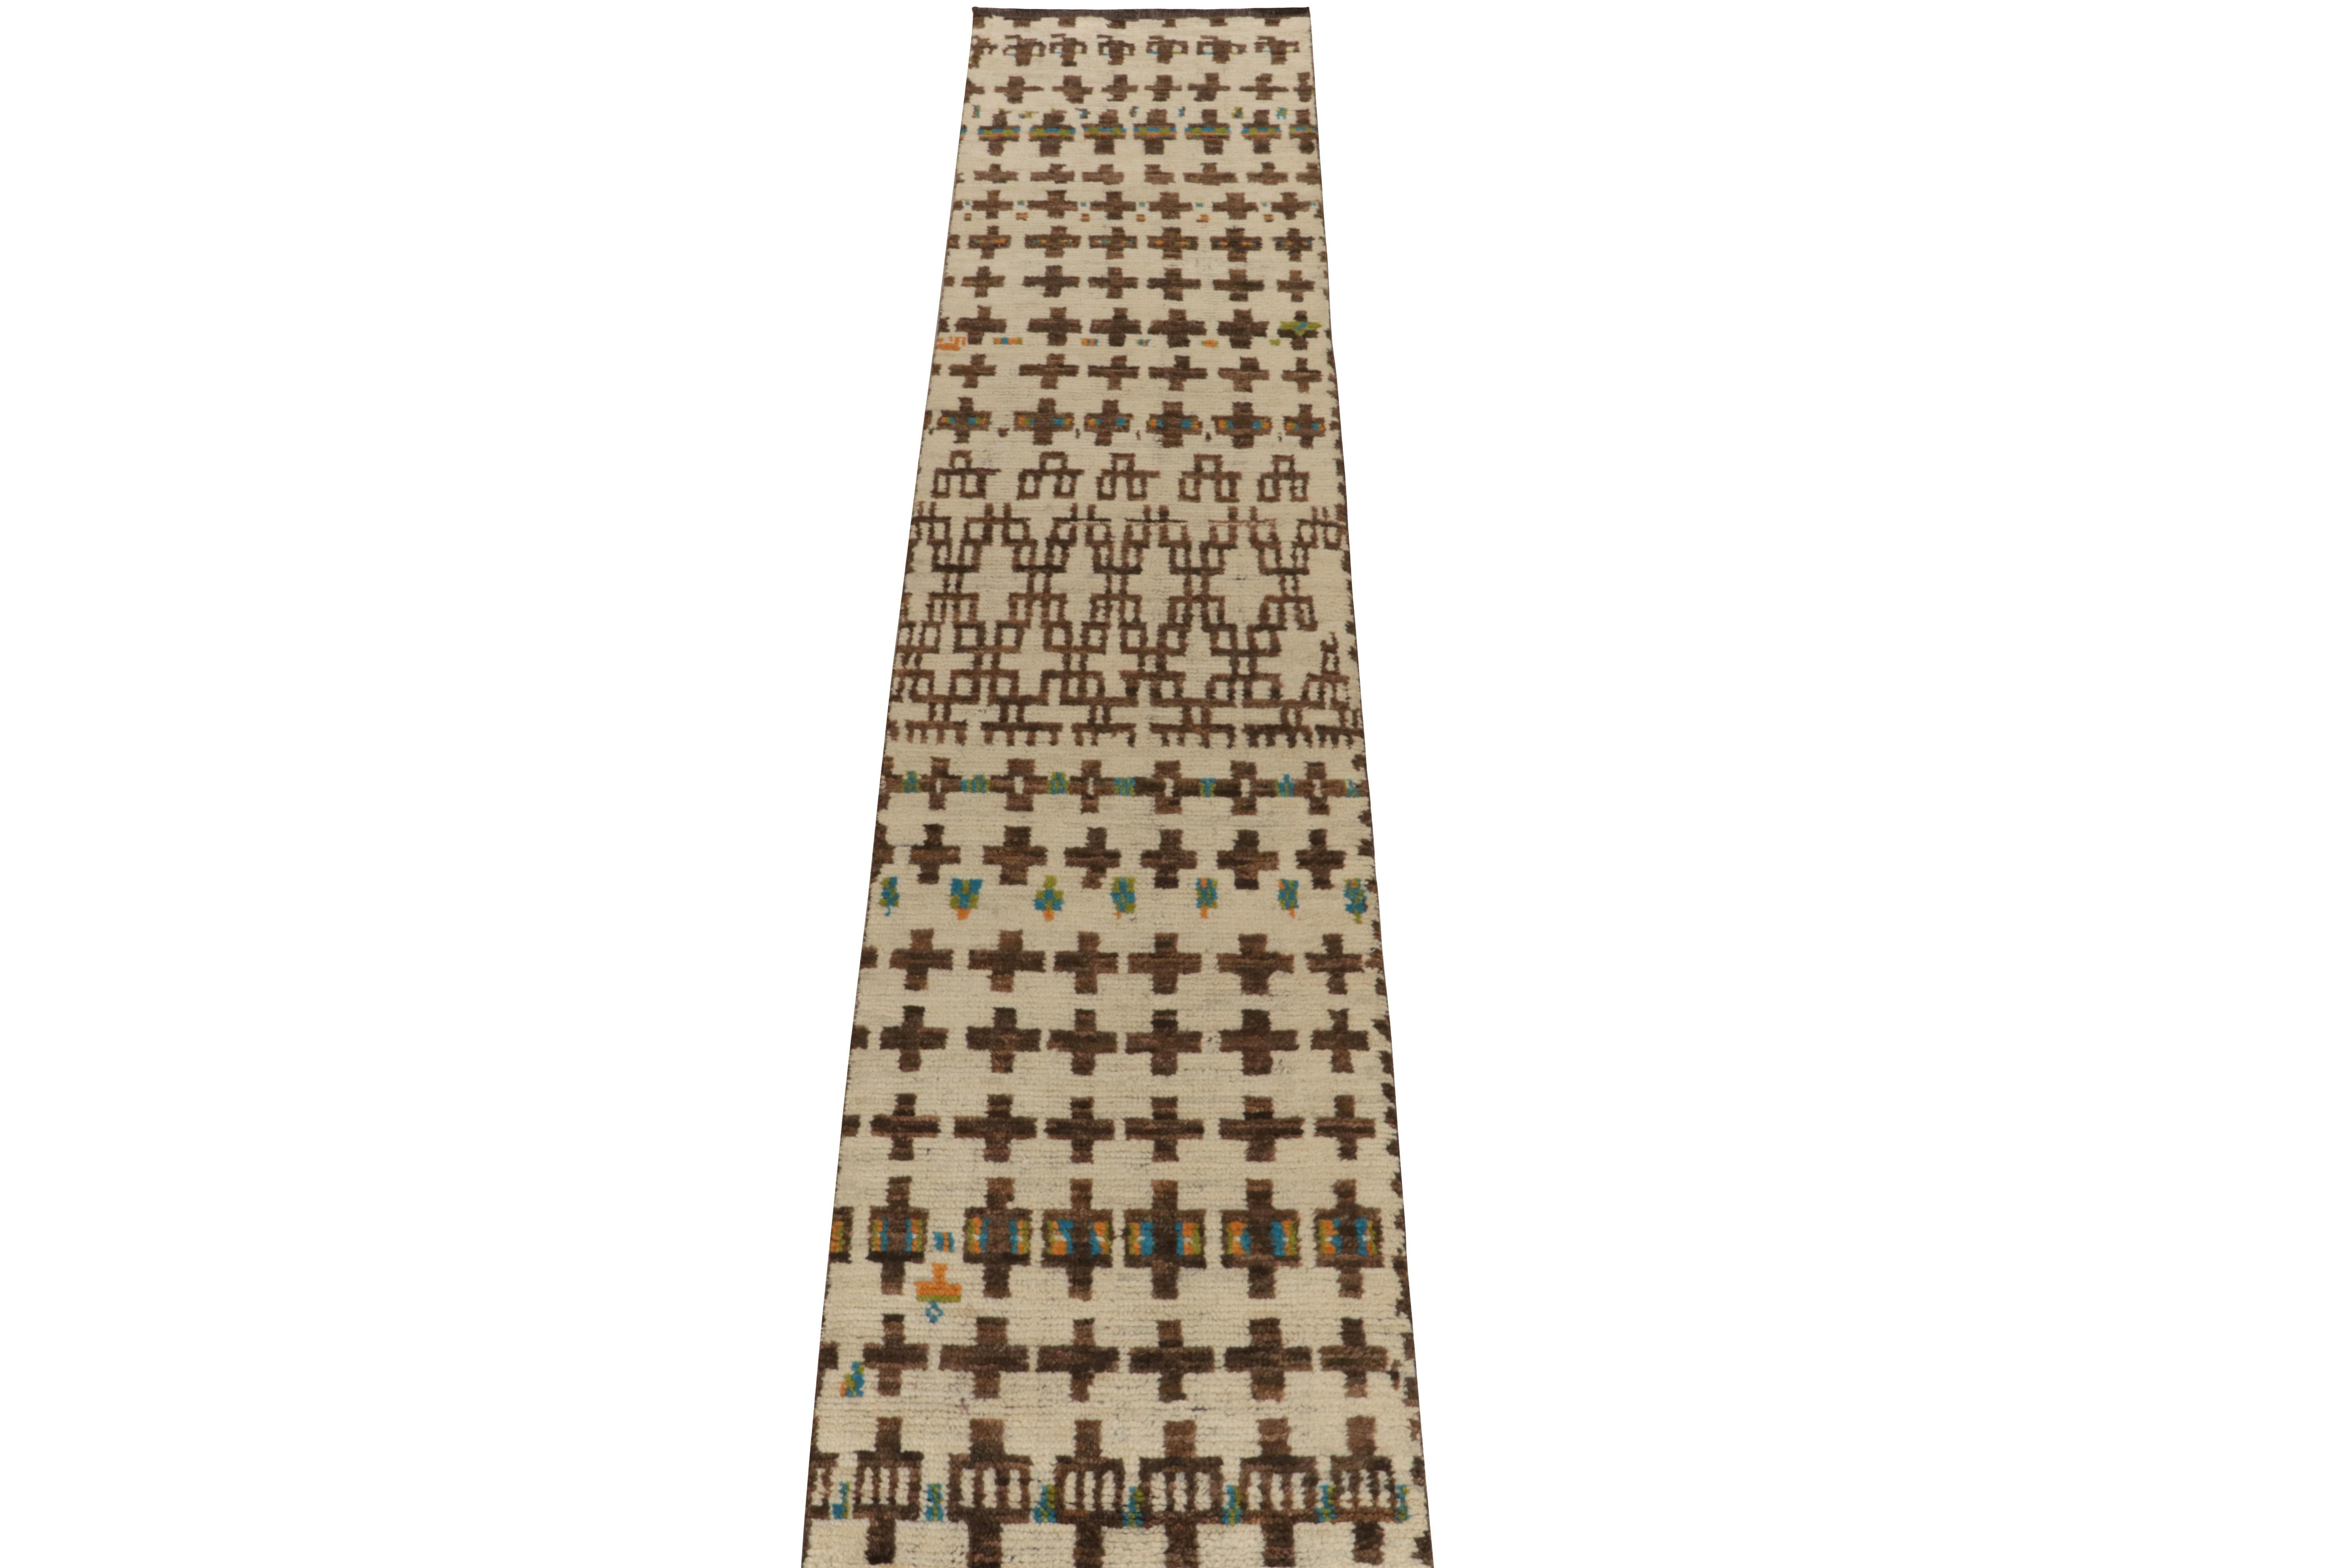 Indian Rug & Kilim’s Moroccan Style Runner in Beige-Brown Tribal Geometric Patterns For Sale